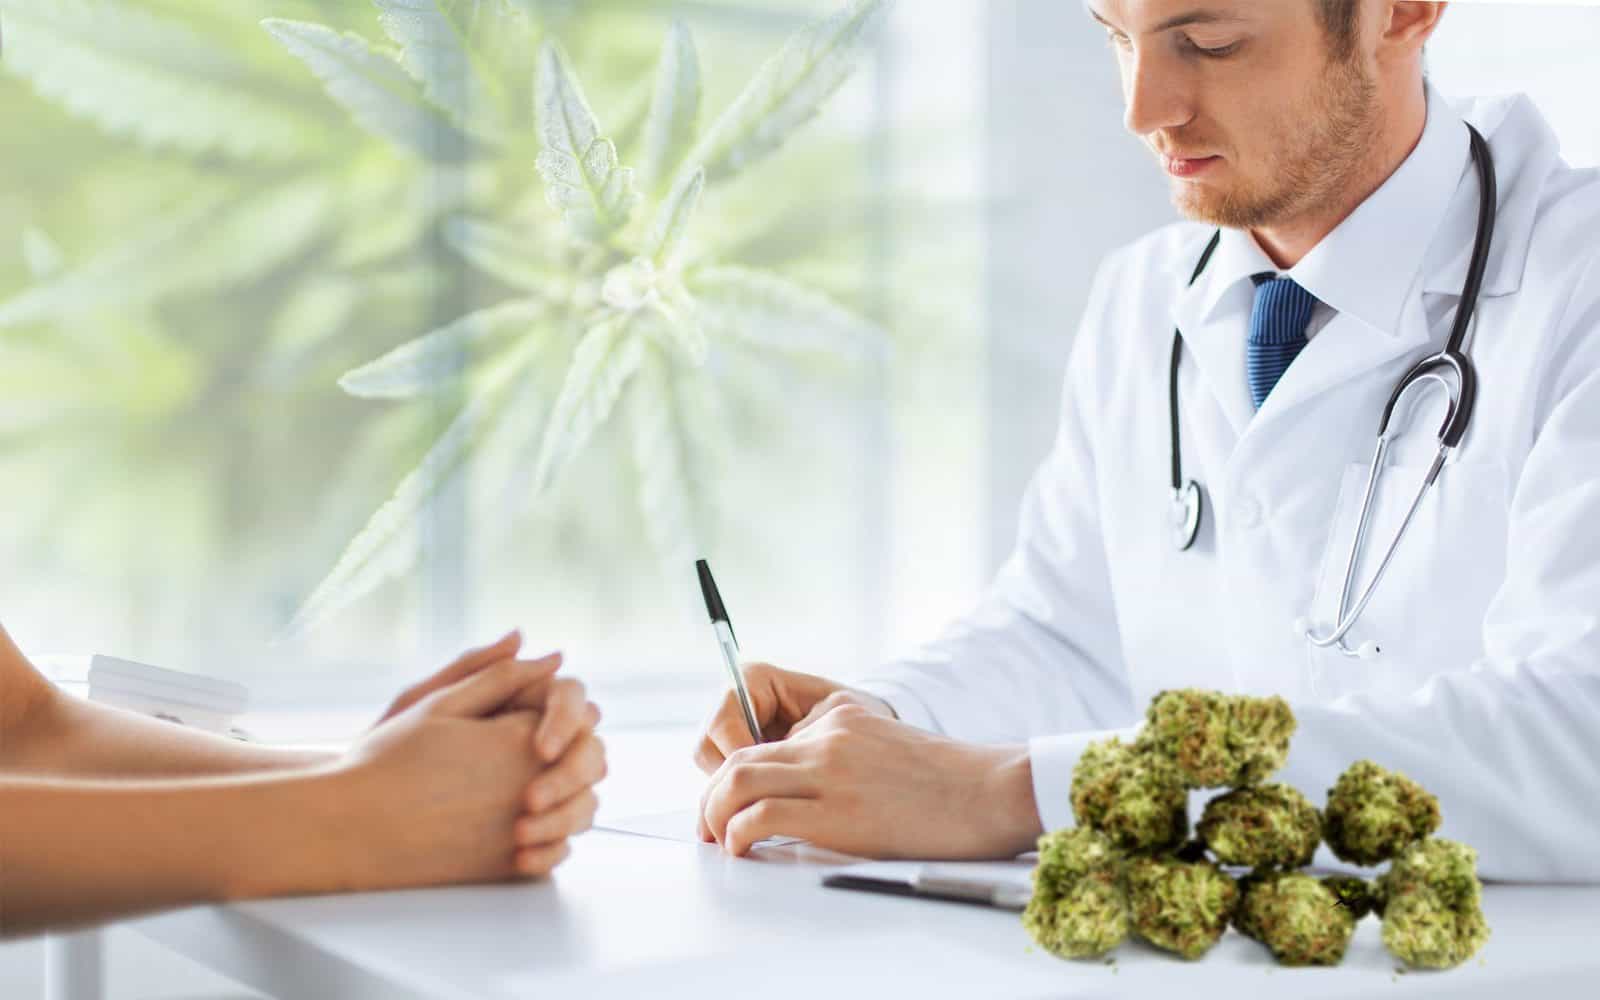 How to Discuss Cannabis Use With Your Doctor